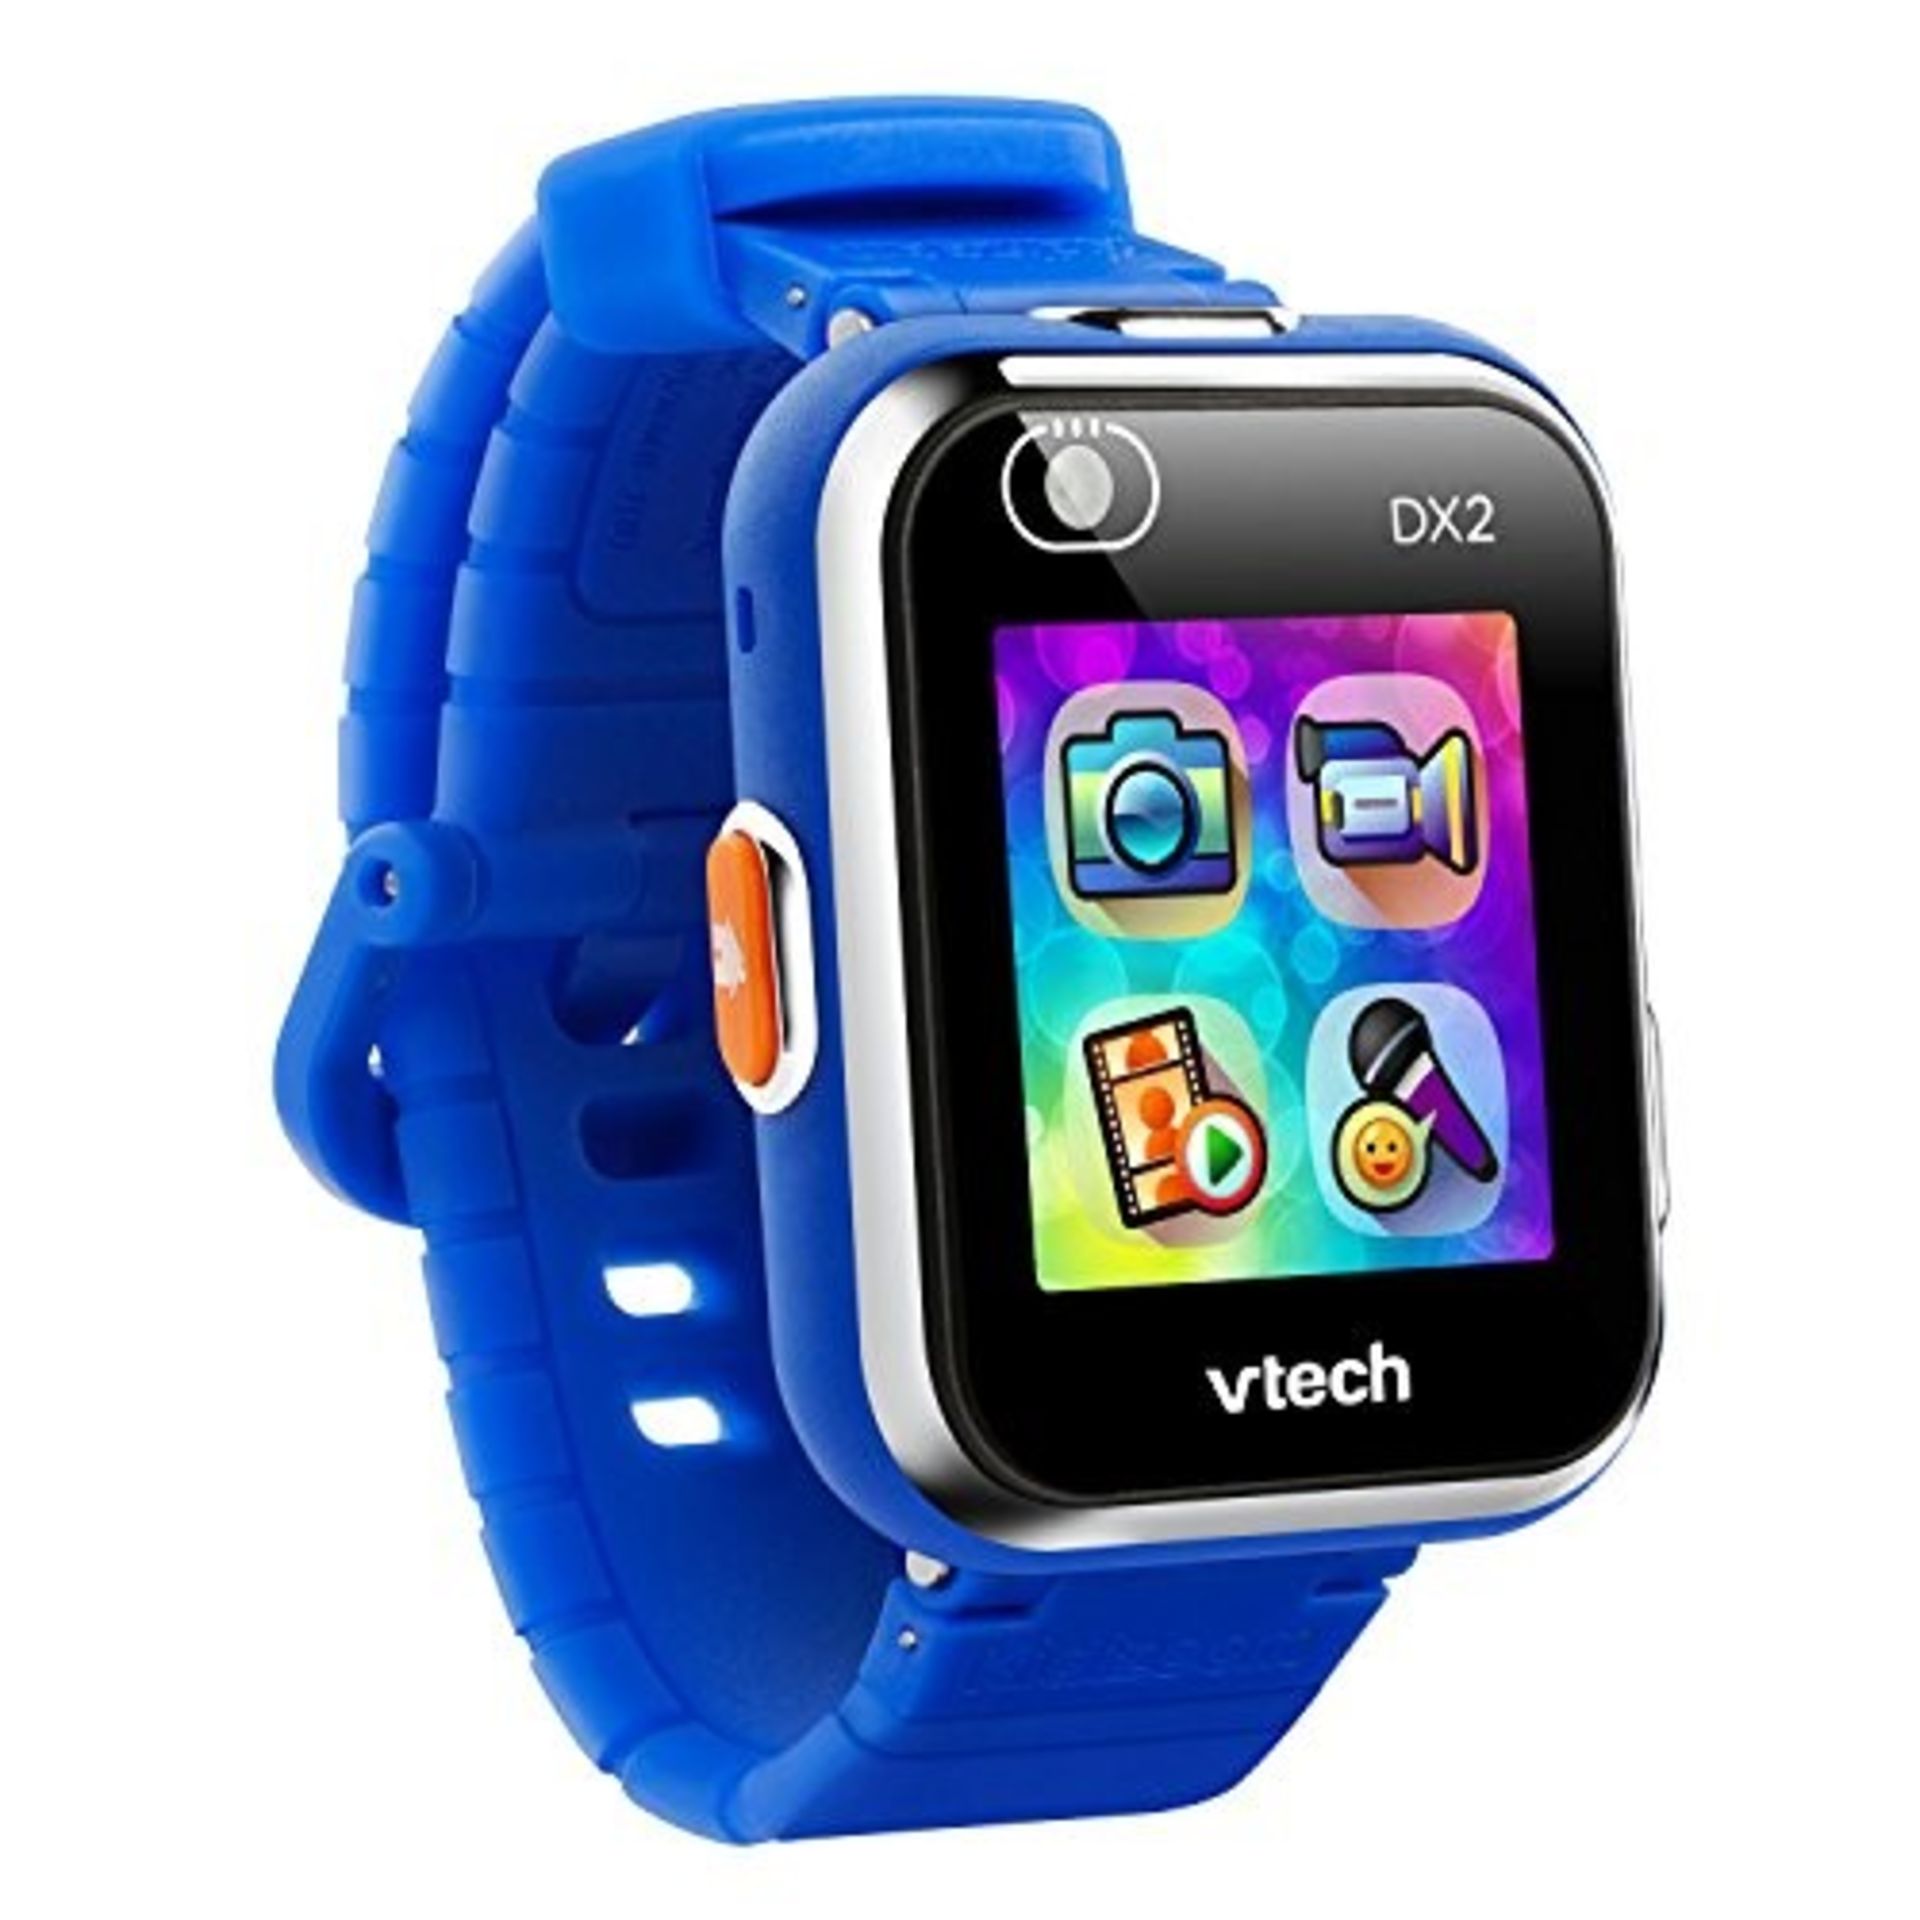 [INCOMPLETE] [CRACKED] VTech 193803 Kidizoom Smart Watch DX2 Toy, Blue